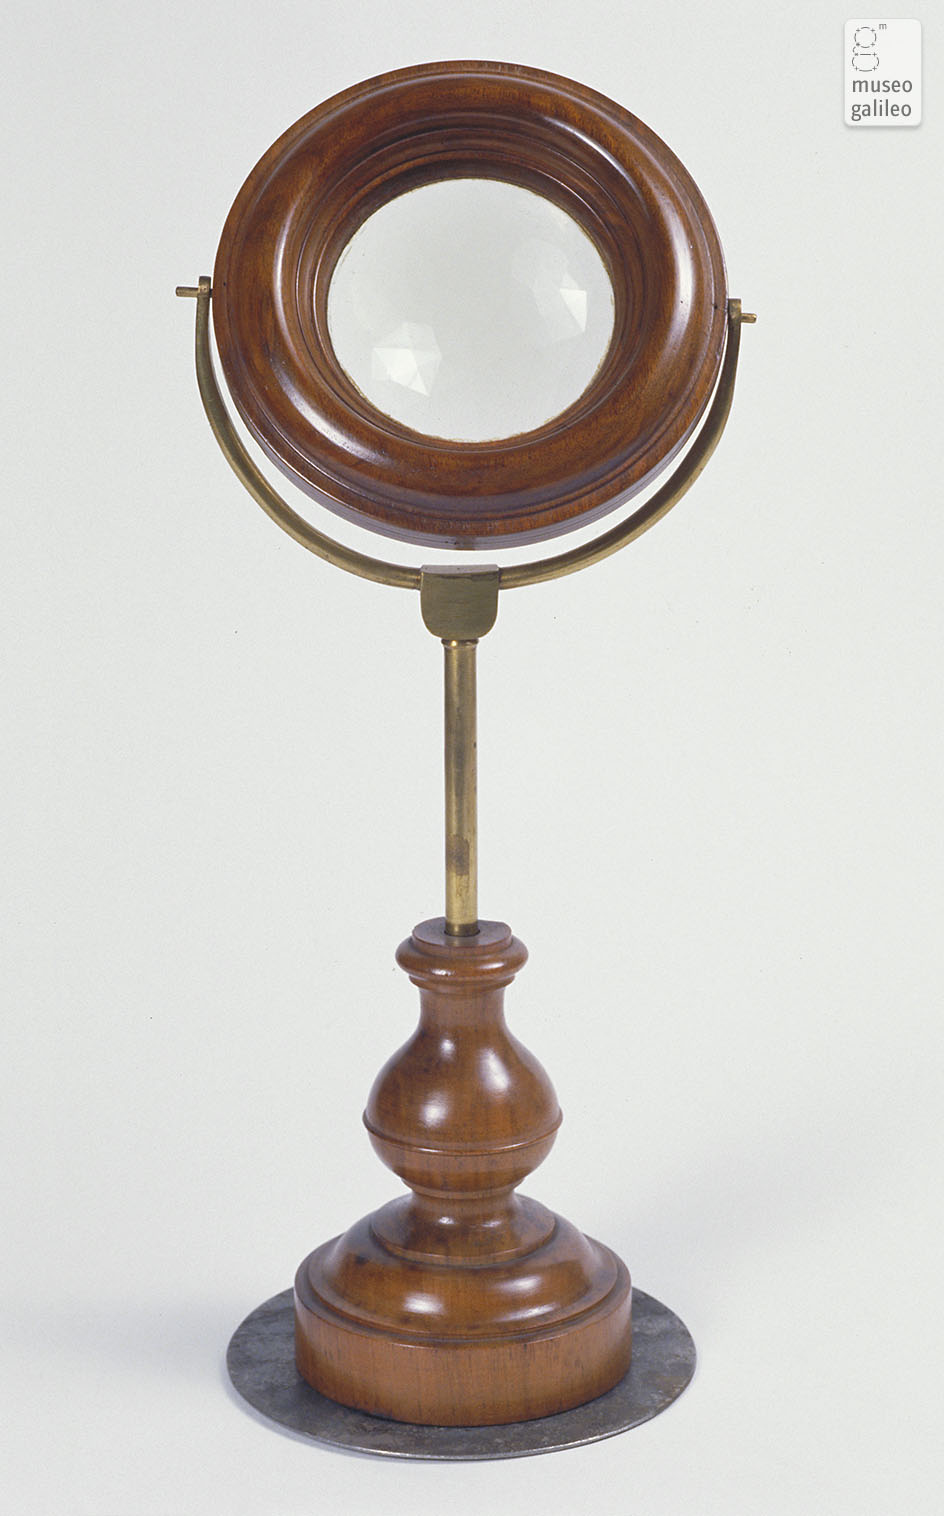 Mounted prismatic lens (Inv. 769)